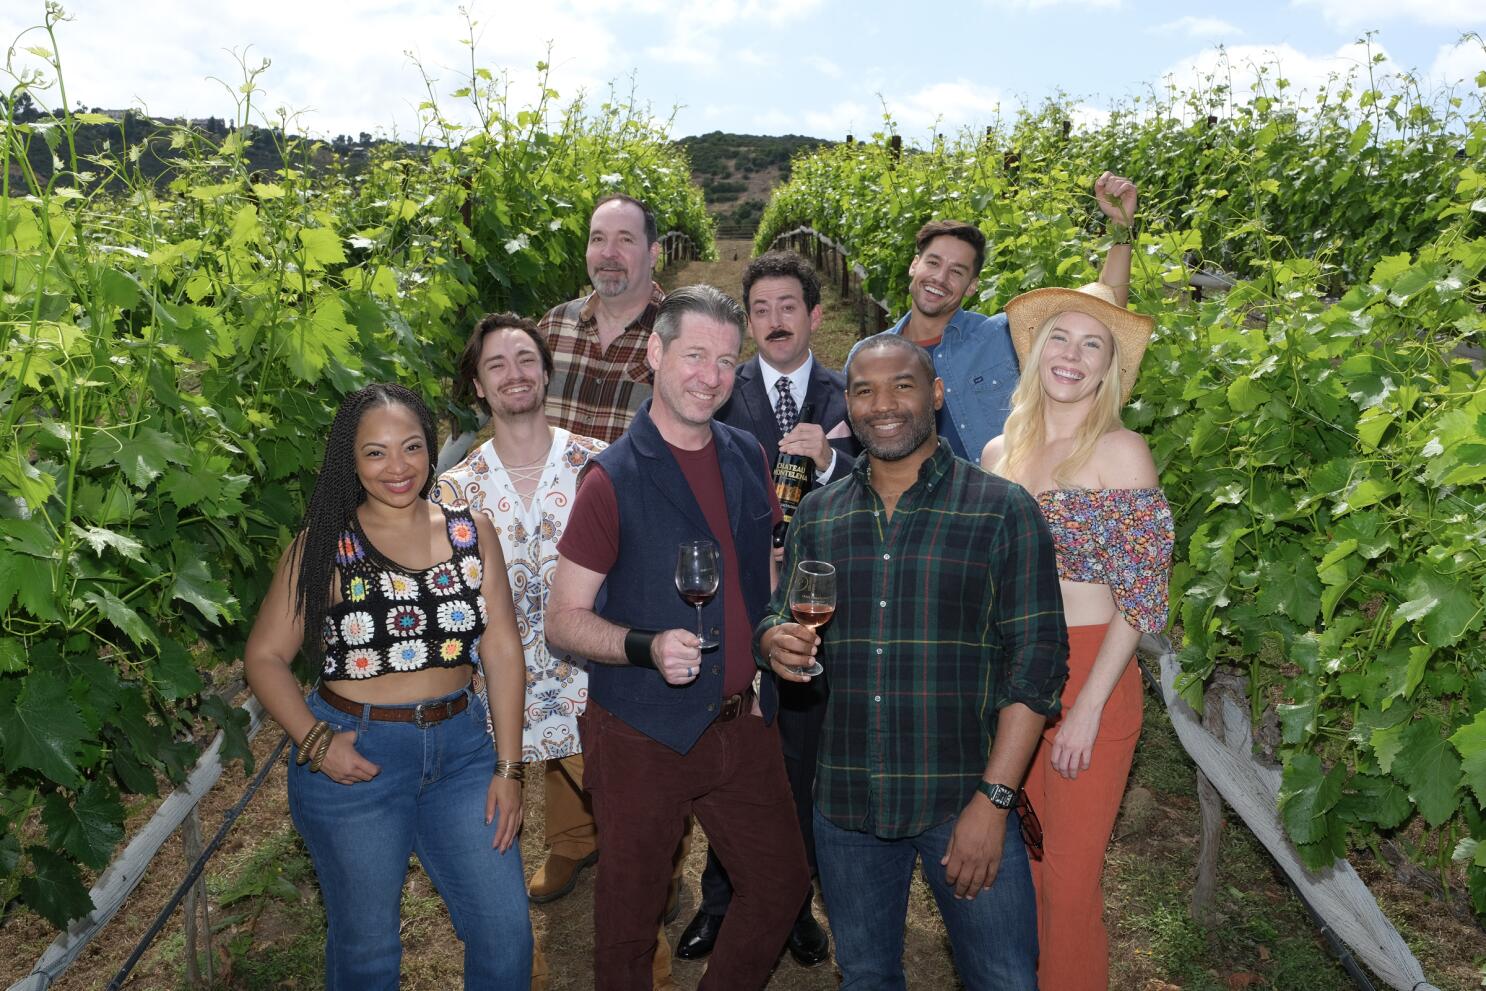 CCAE Theatricals opening world premiere musical based on the wine-centric  film 'Bottle Shock' - The San Diego Union-Tribune